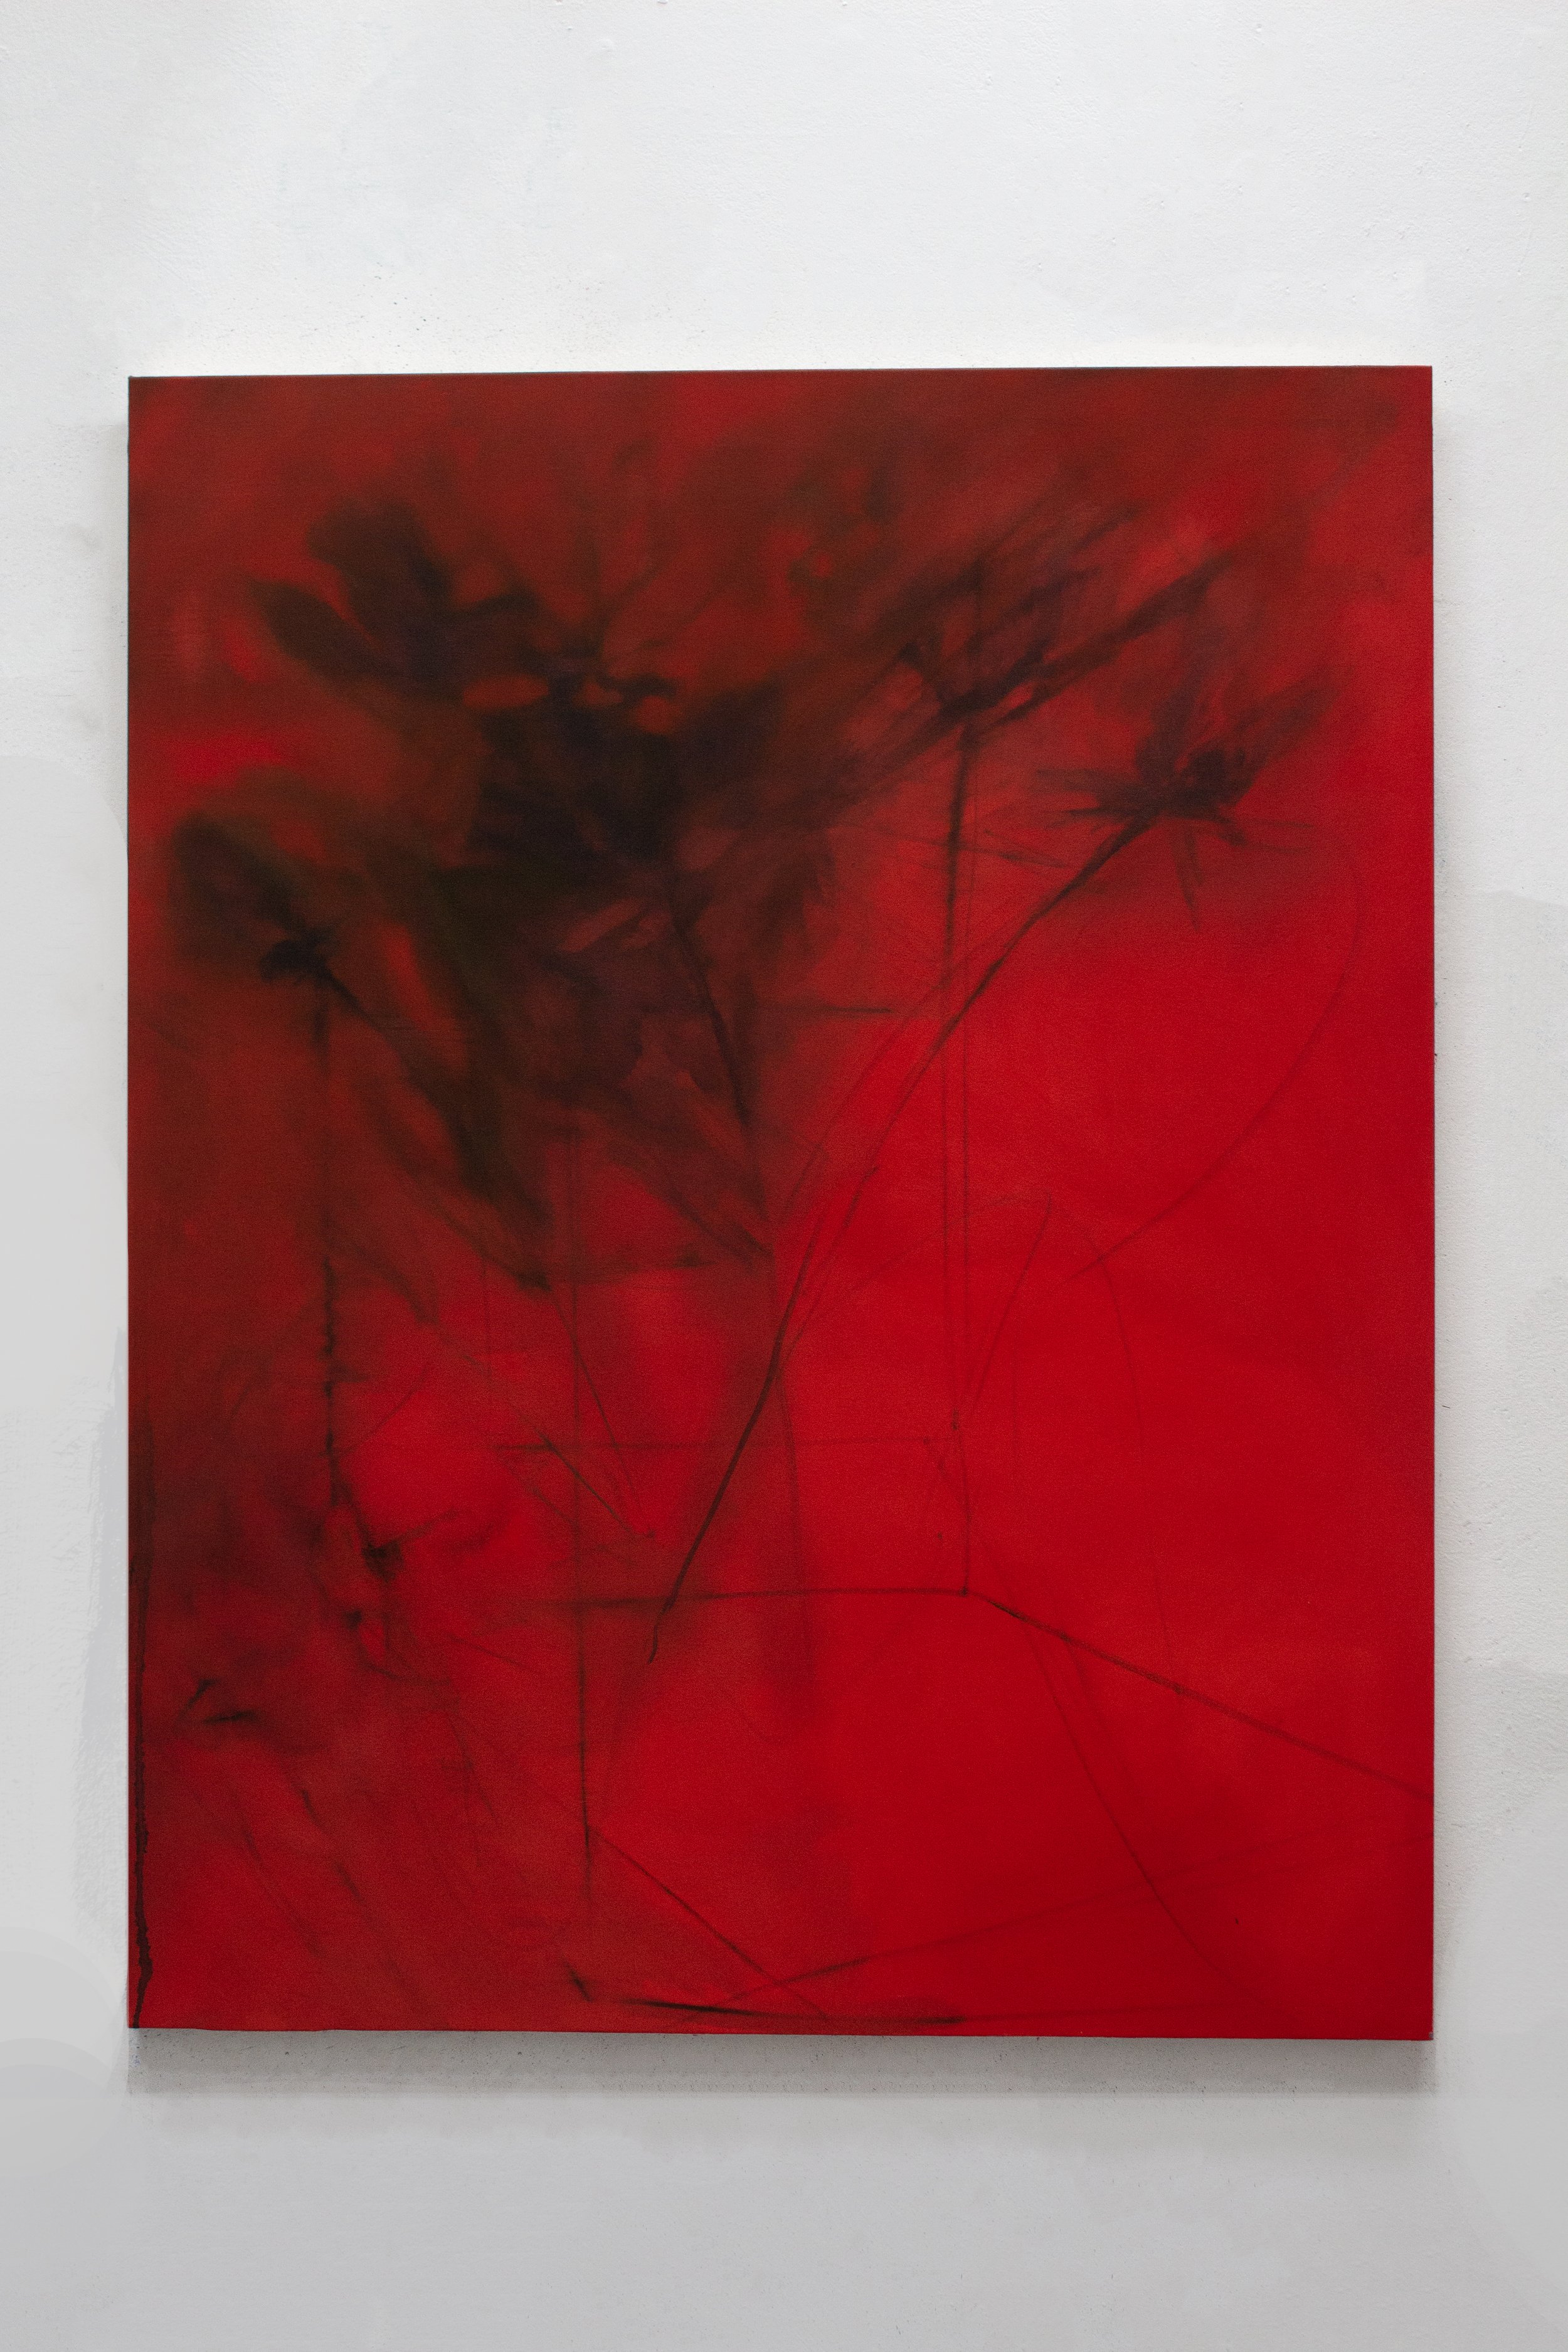  Red moves the blood, Oil on canvas, 140 x 110 cm, 2023 